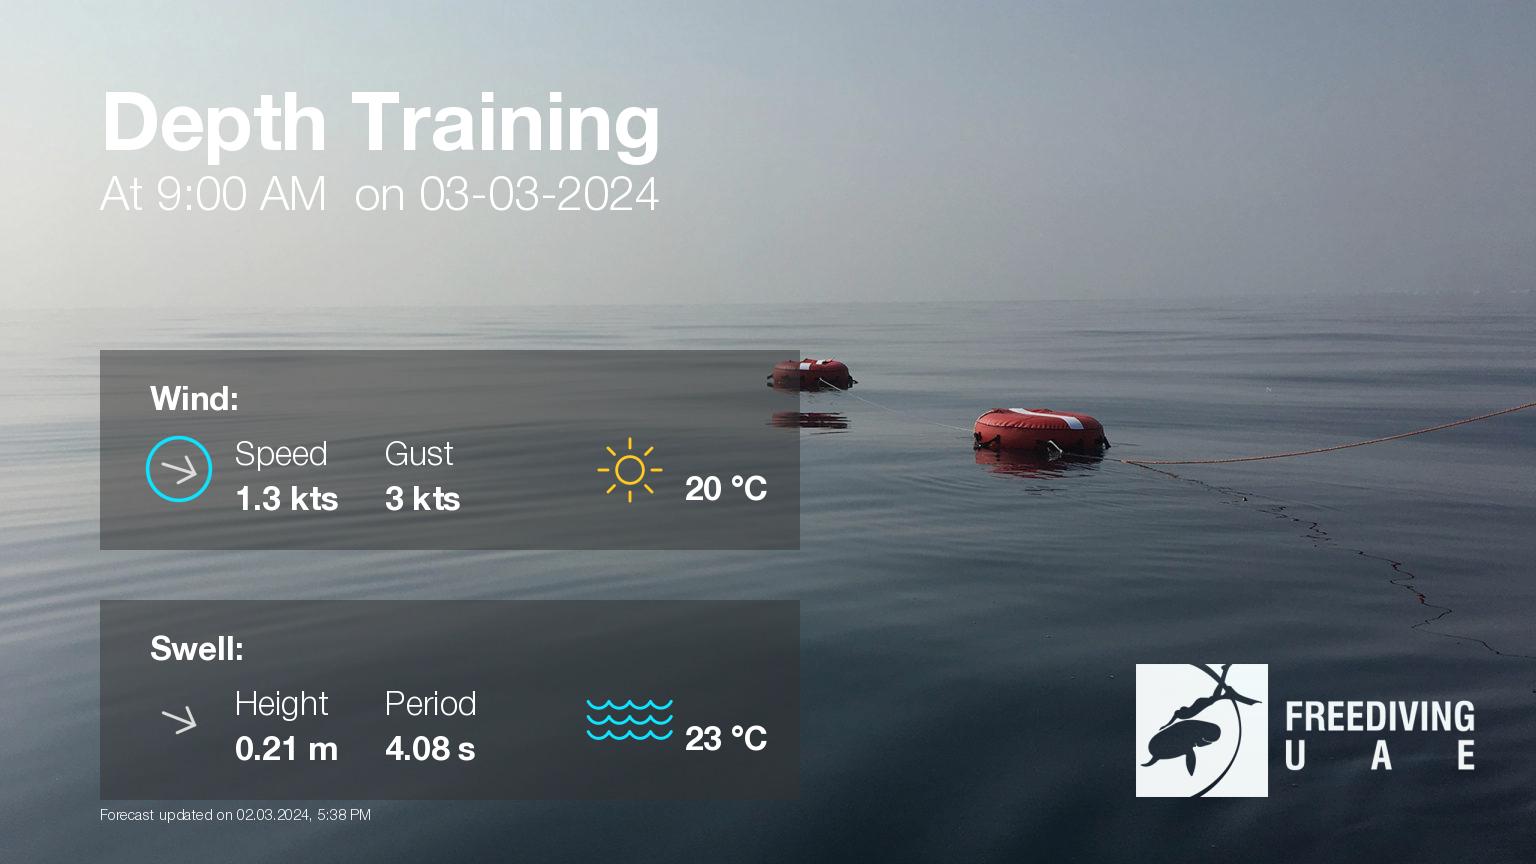 Expected weather during Depth Training on Sun, Mar 3, at 9:00 AM